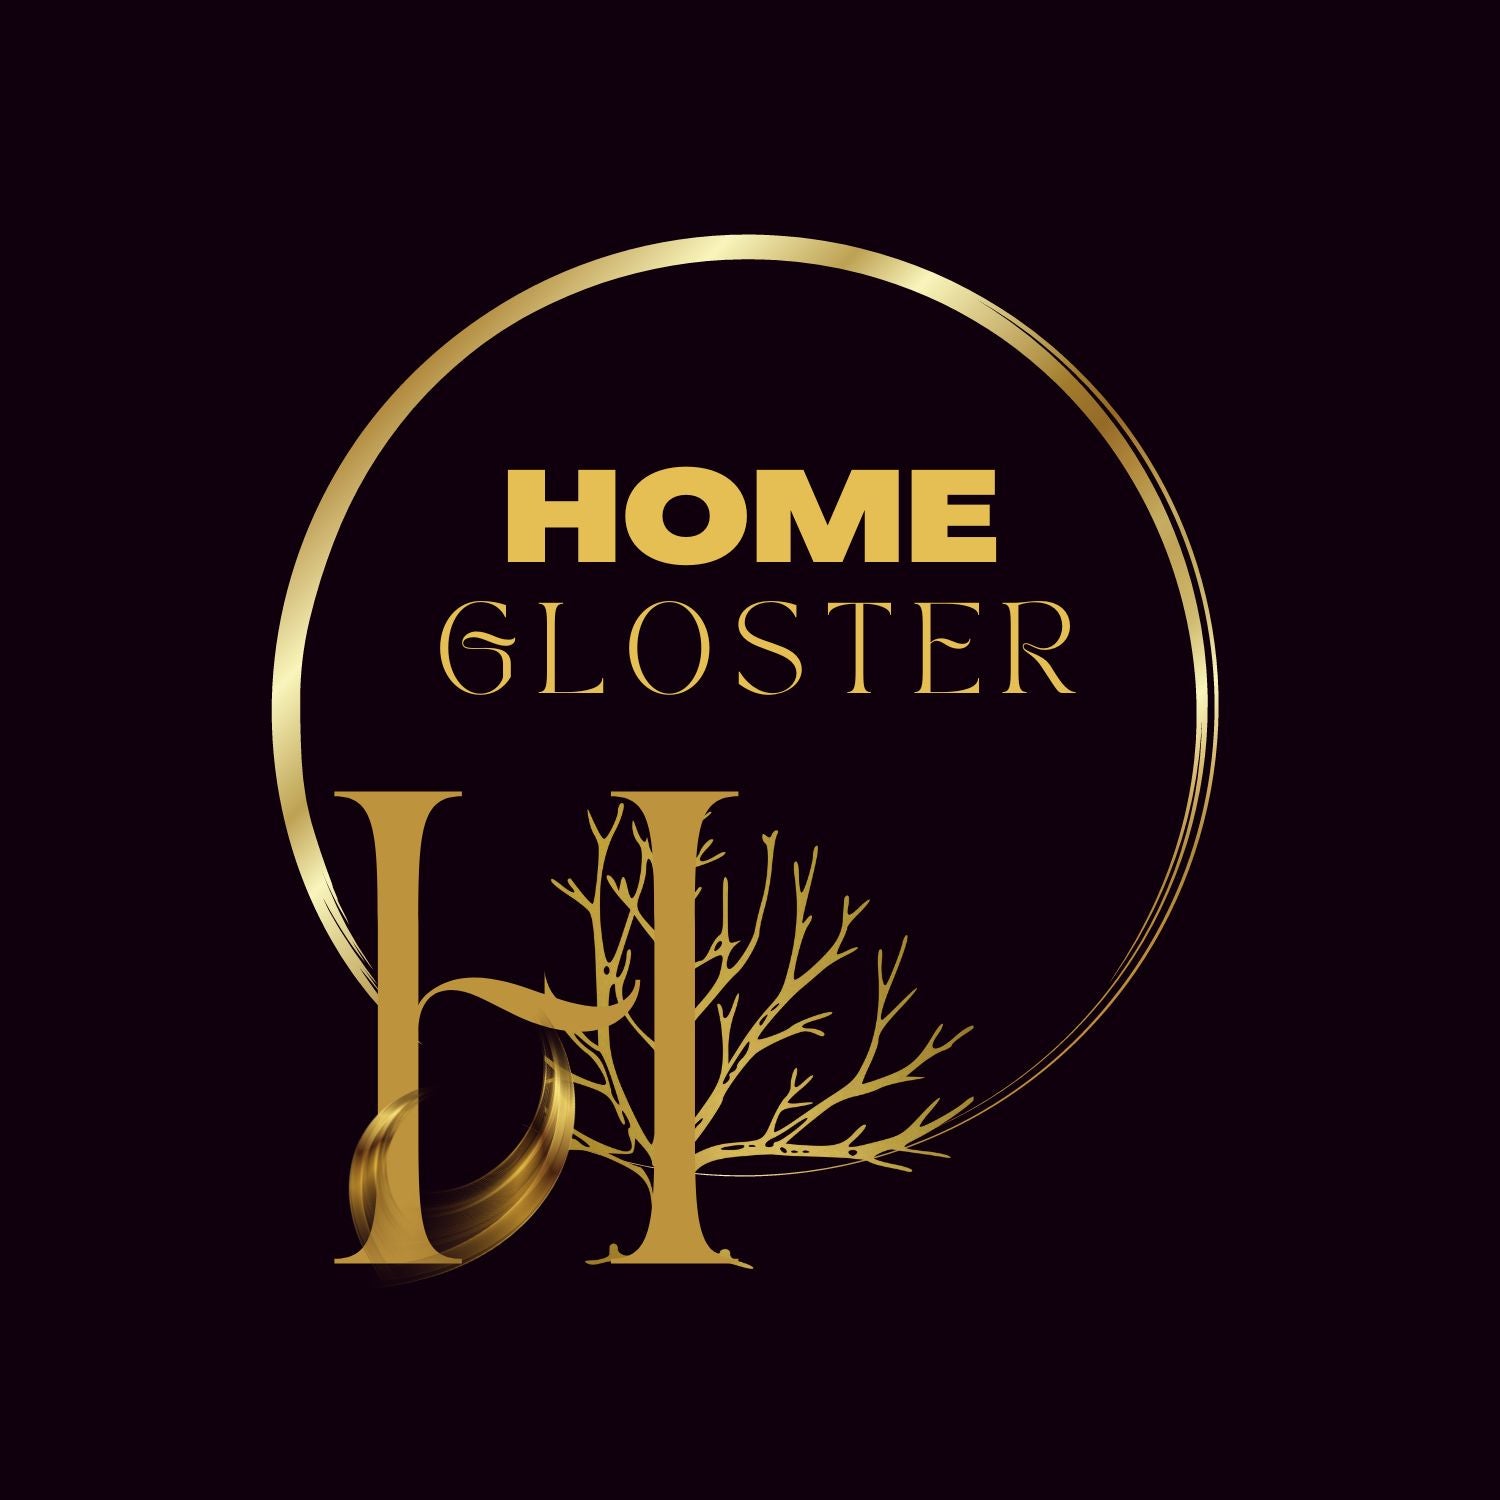 Home Gloster